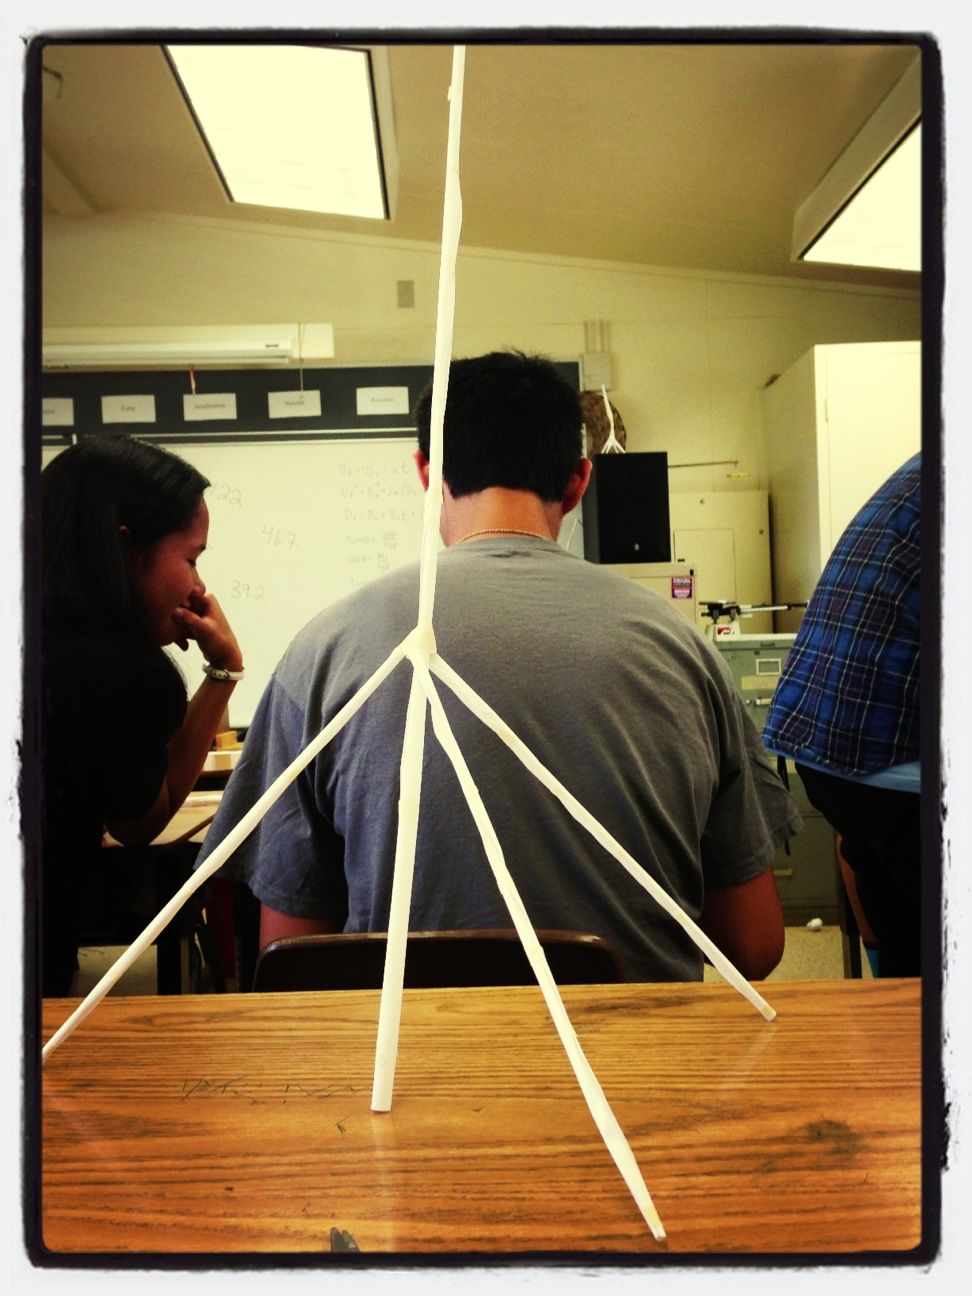 Building a paper tower